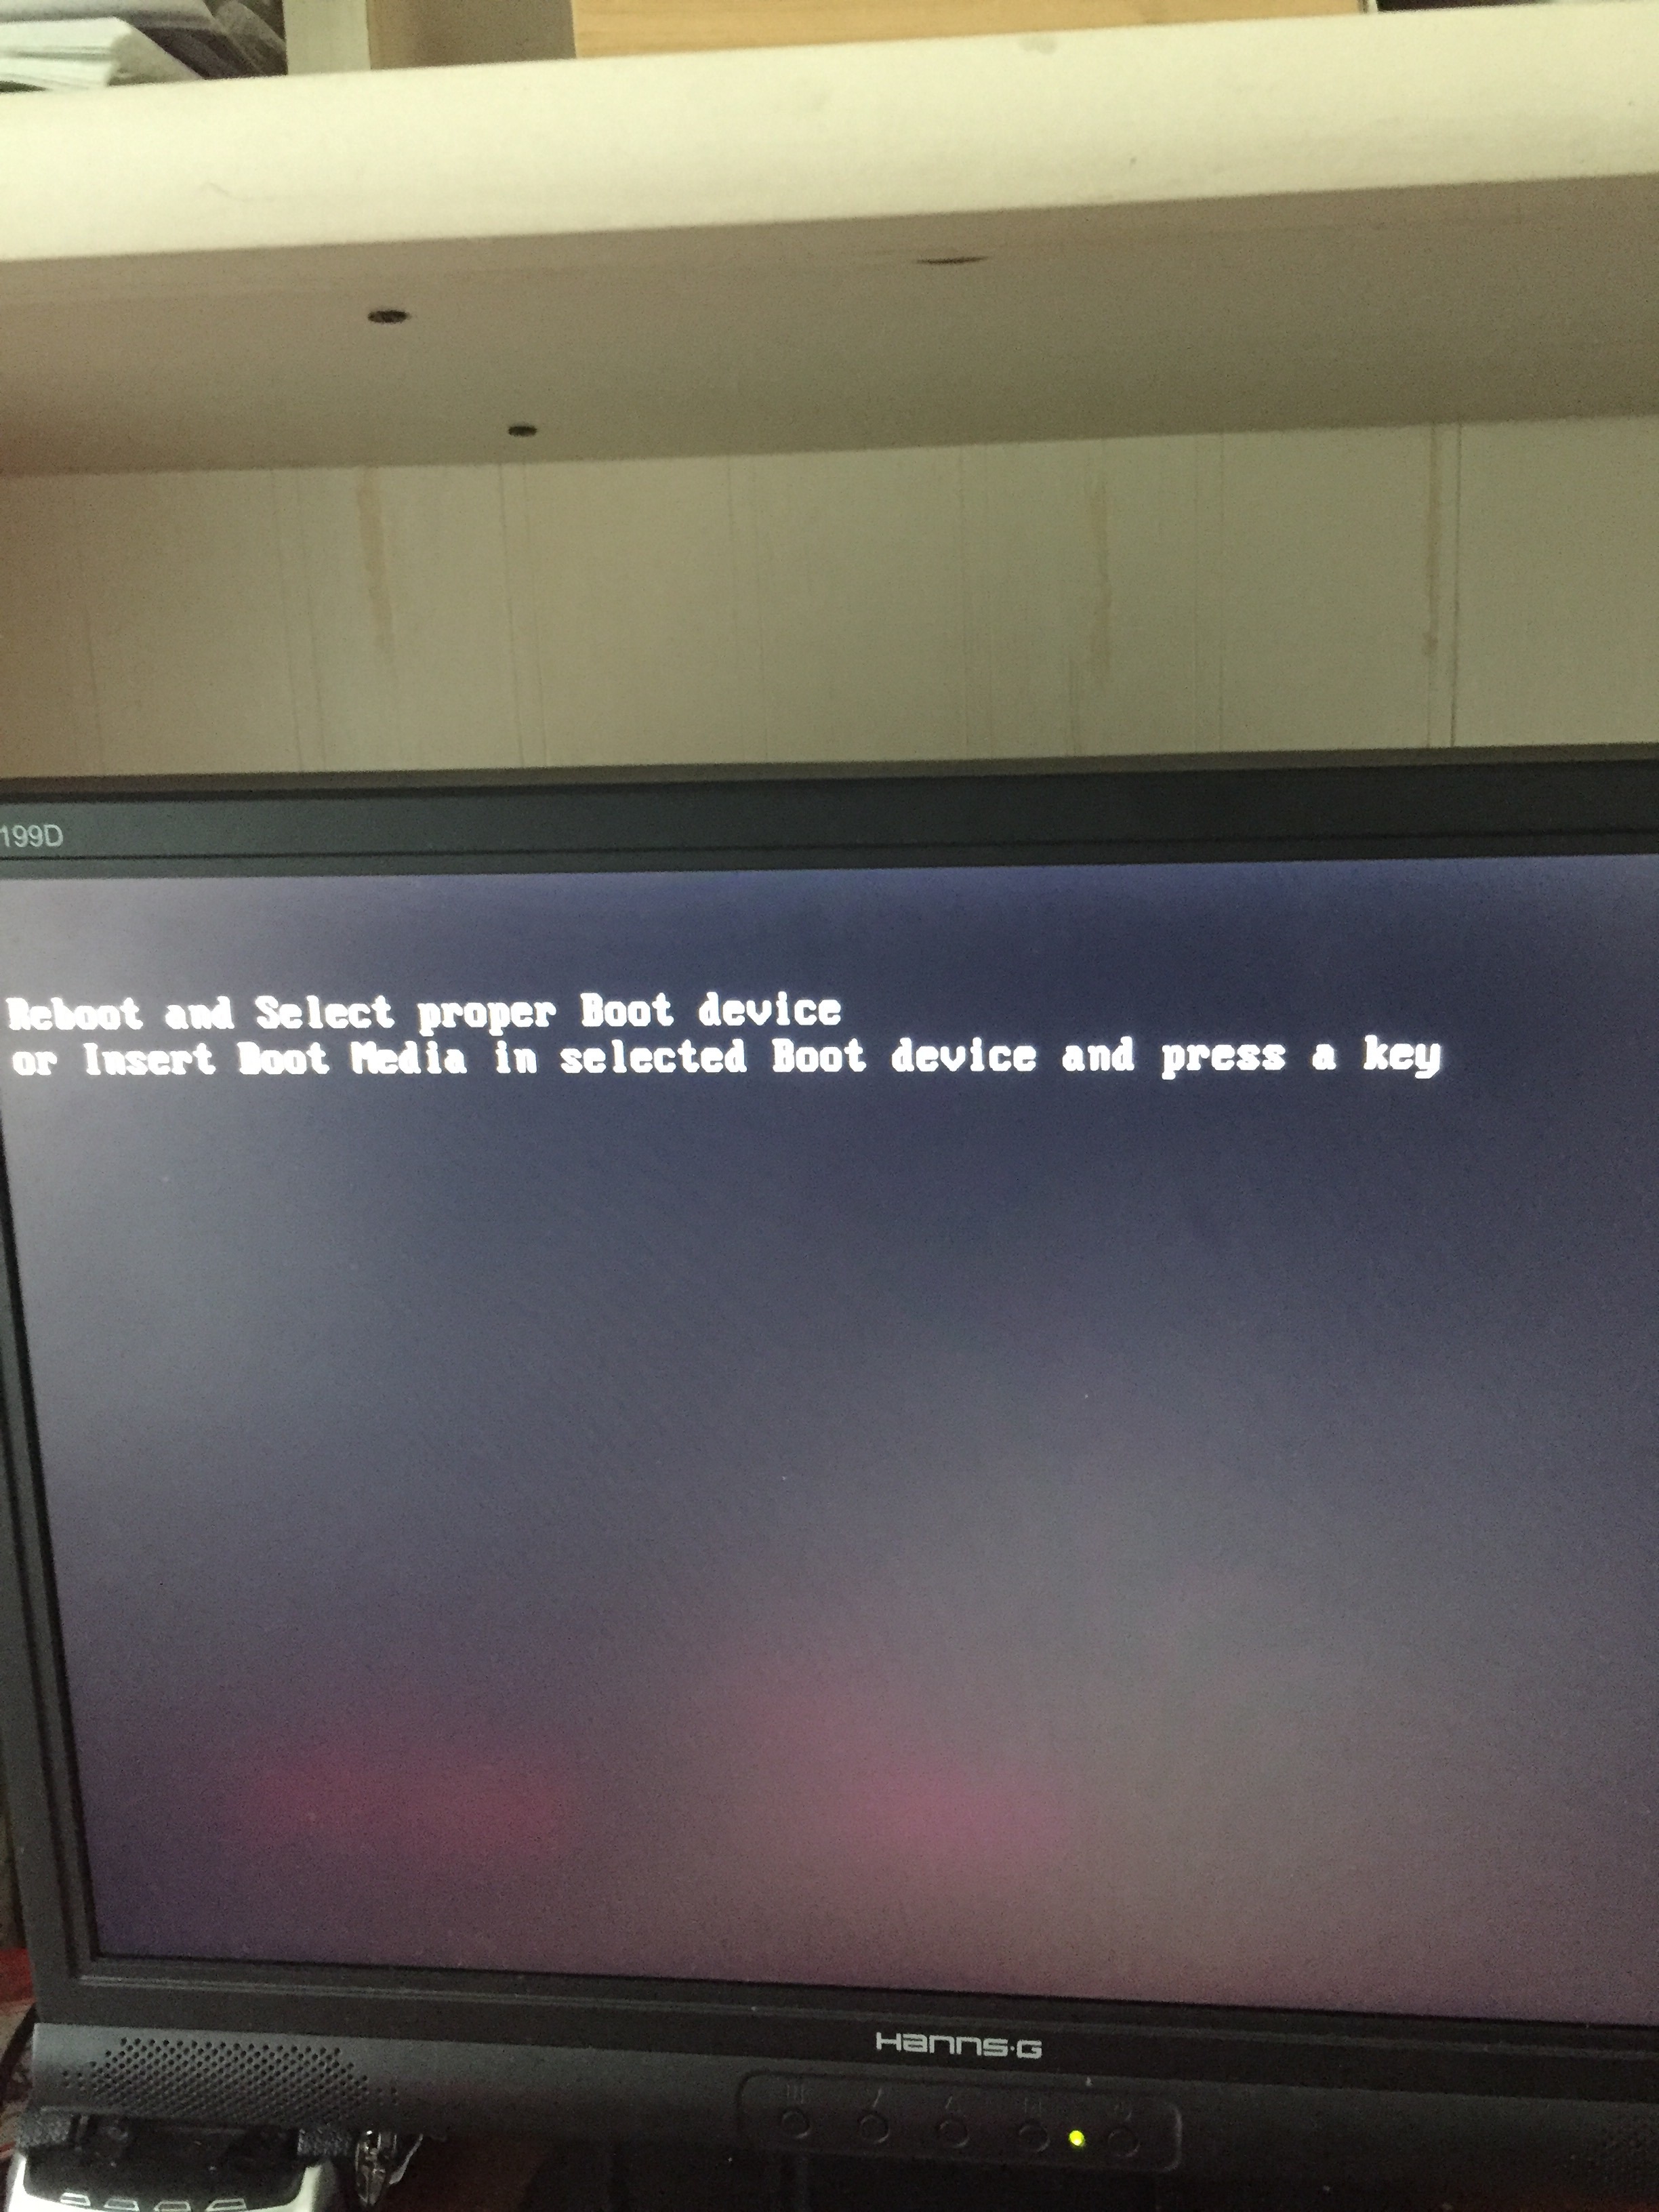 Reboot And Select Proper Media Device Or Insert Boot Media In